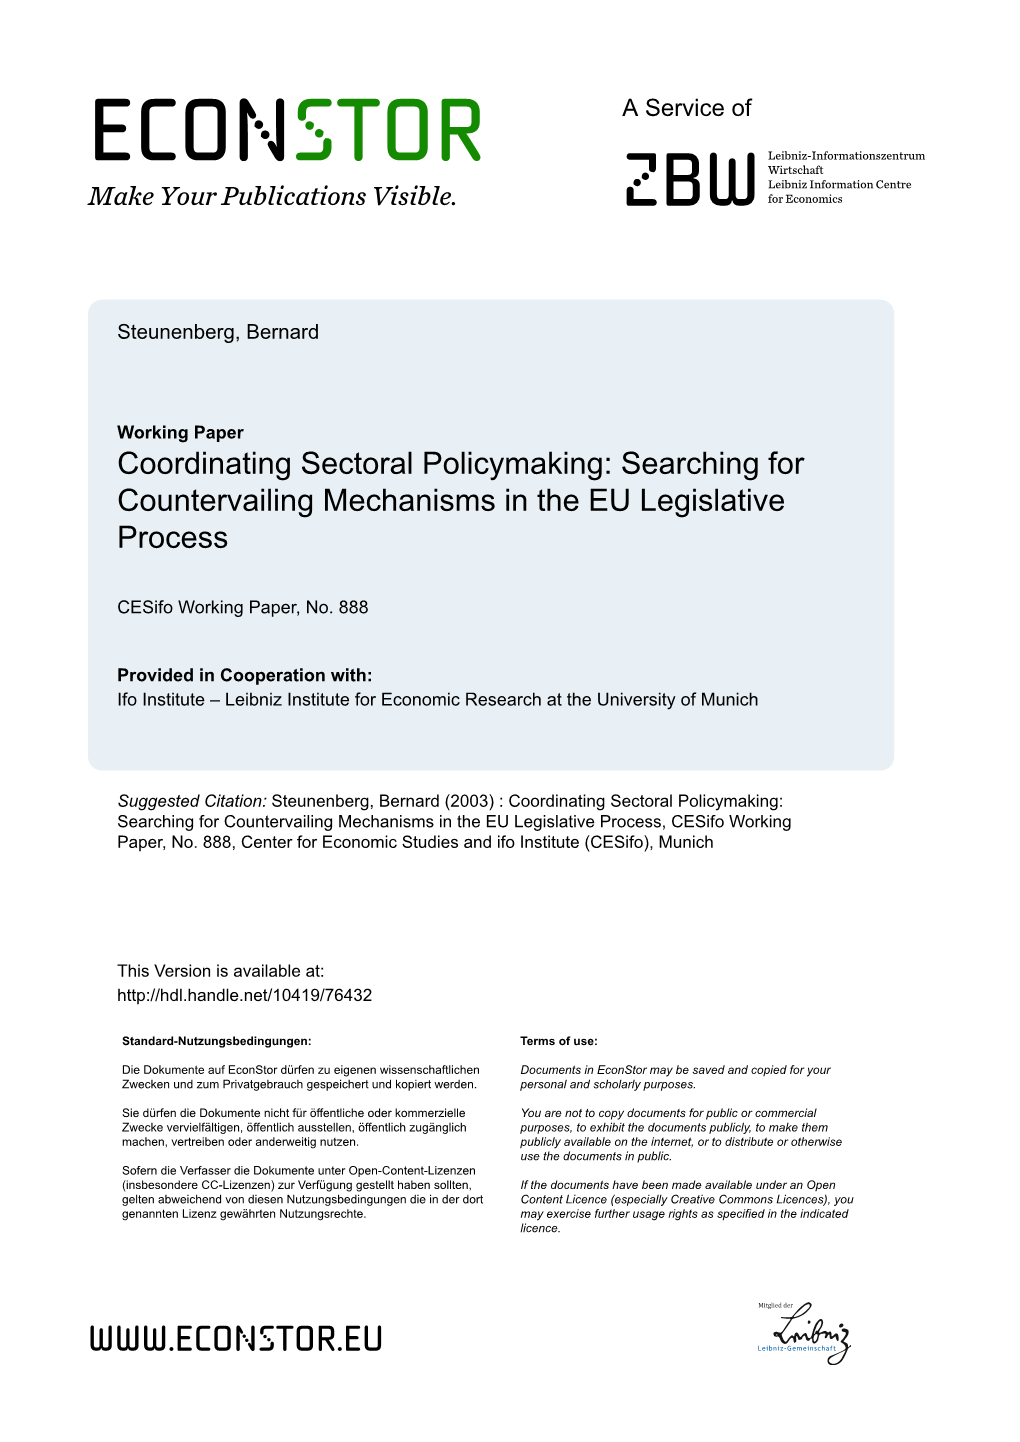 Coordinating Sectoral Policymaking: Searching for Countervailing Mechanisms in the EU Legislative Process